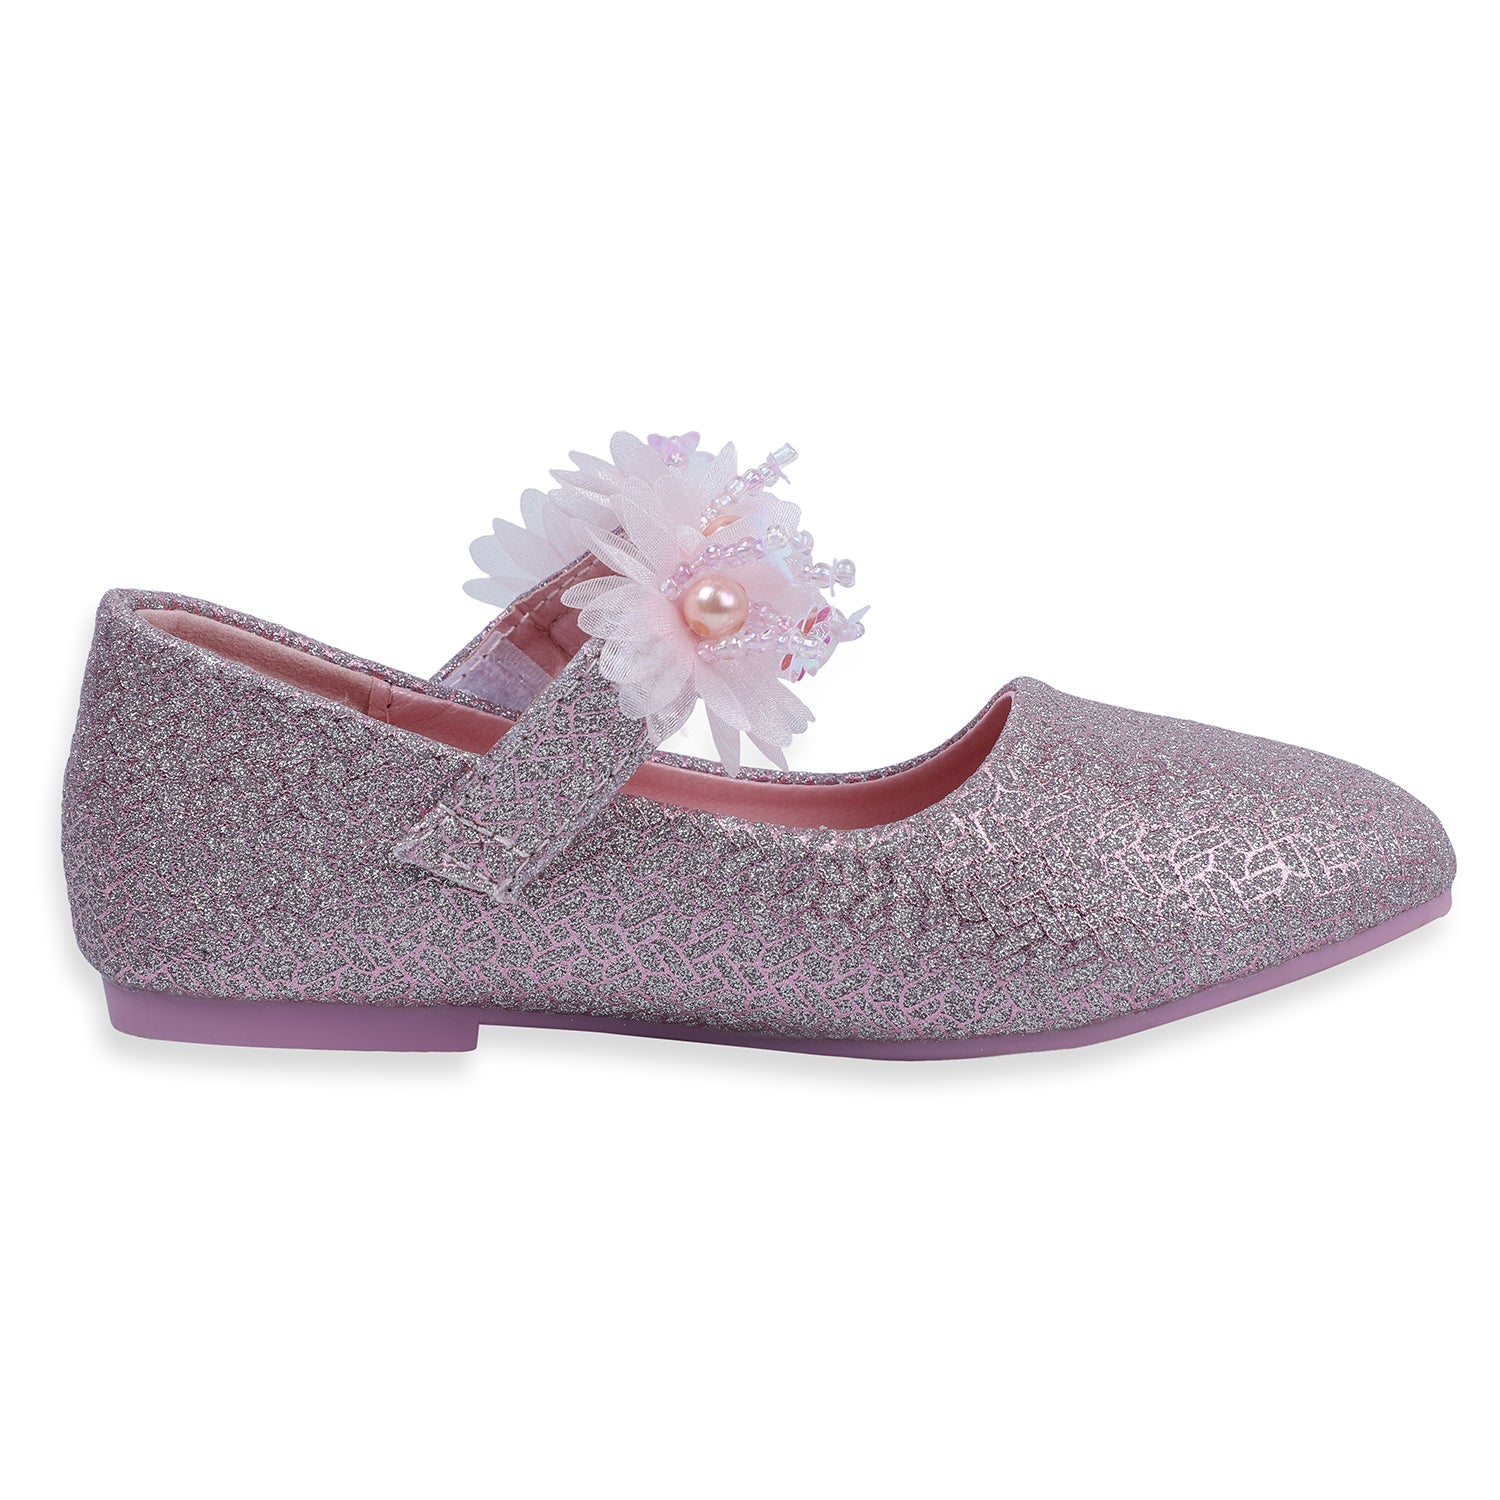 Baby Moo x Bash Kids Shiny Floral Applique Mary Jane Ballerinas - Pink